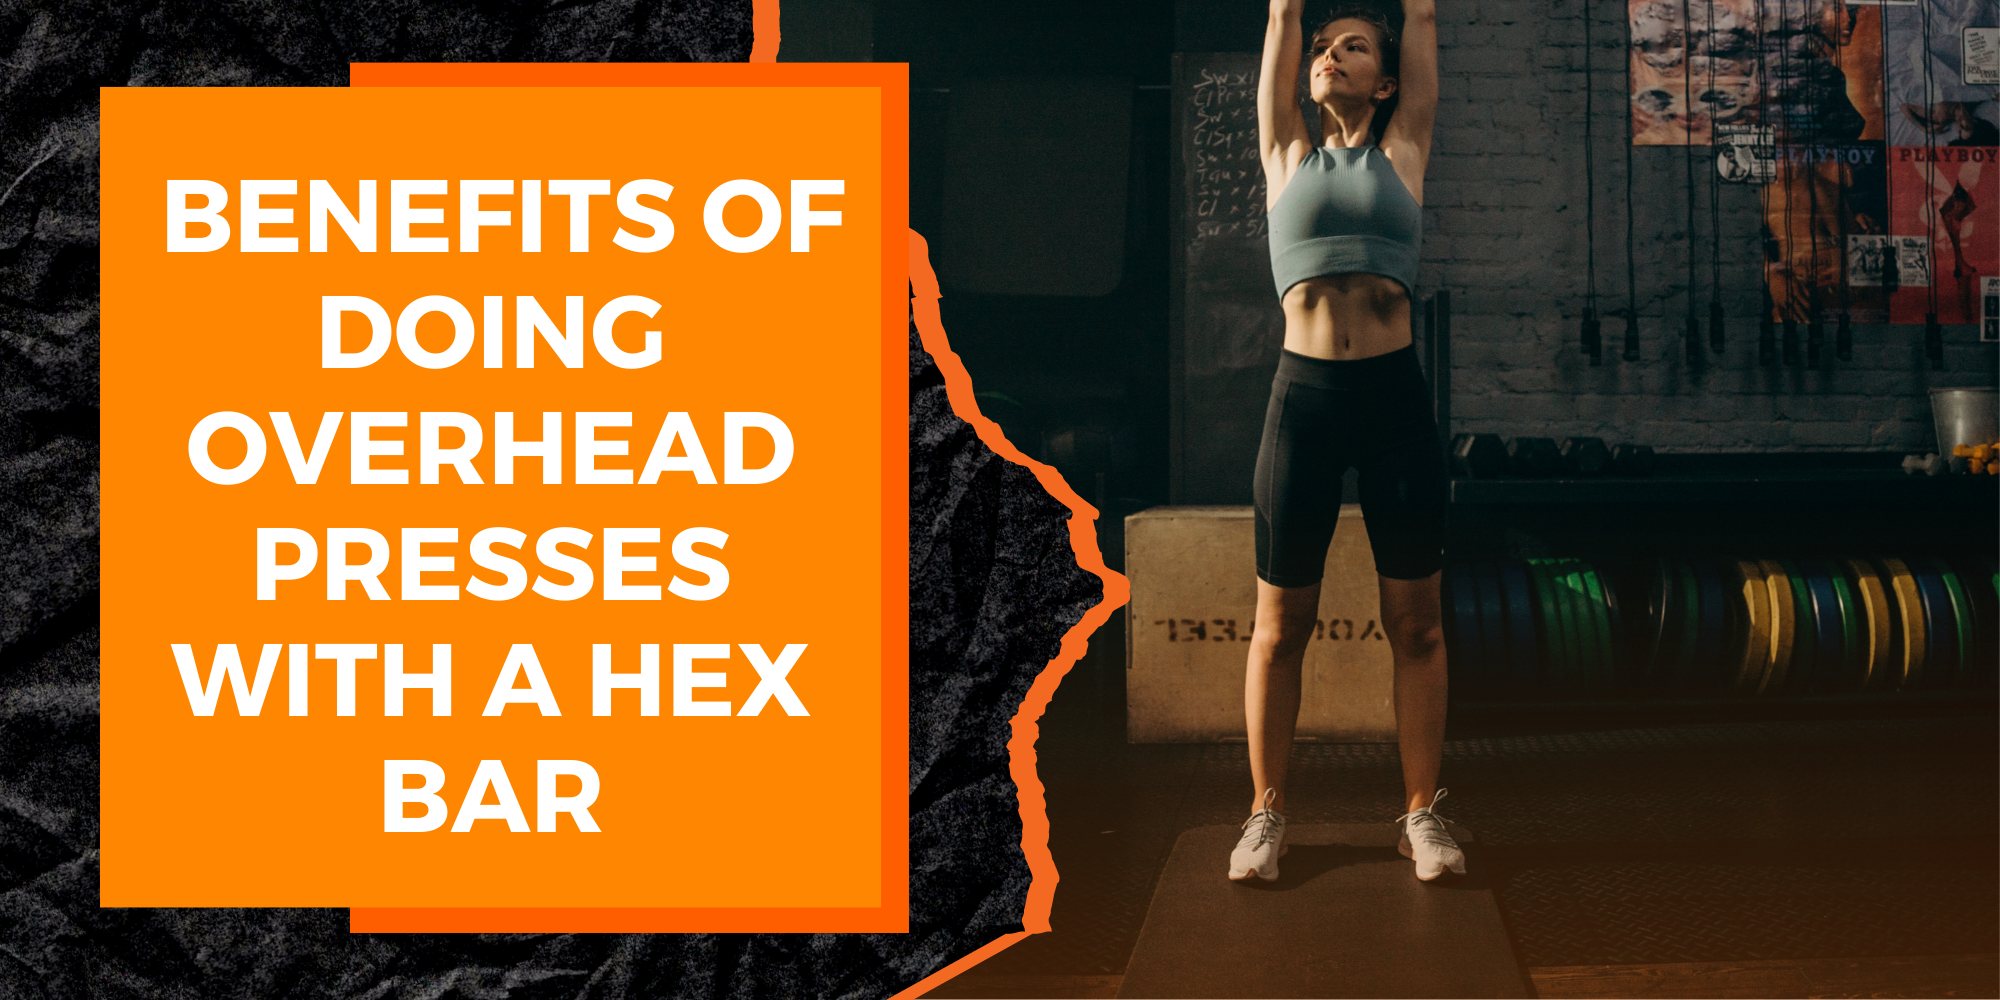 The Benefits of Doing Overhead Presses With a Hex Bar